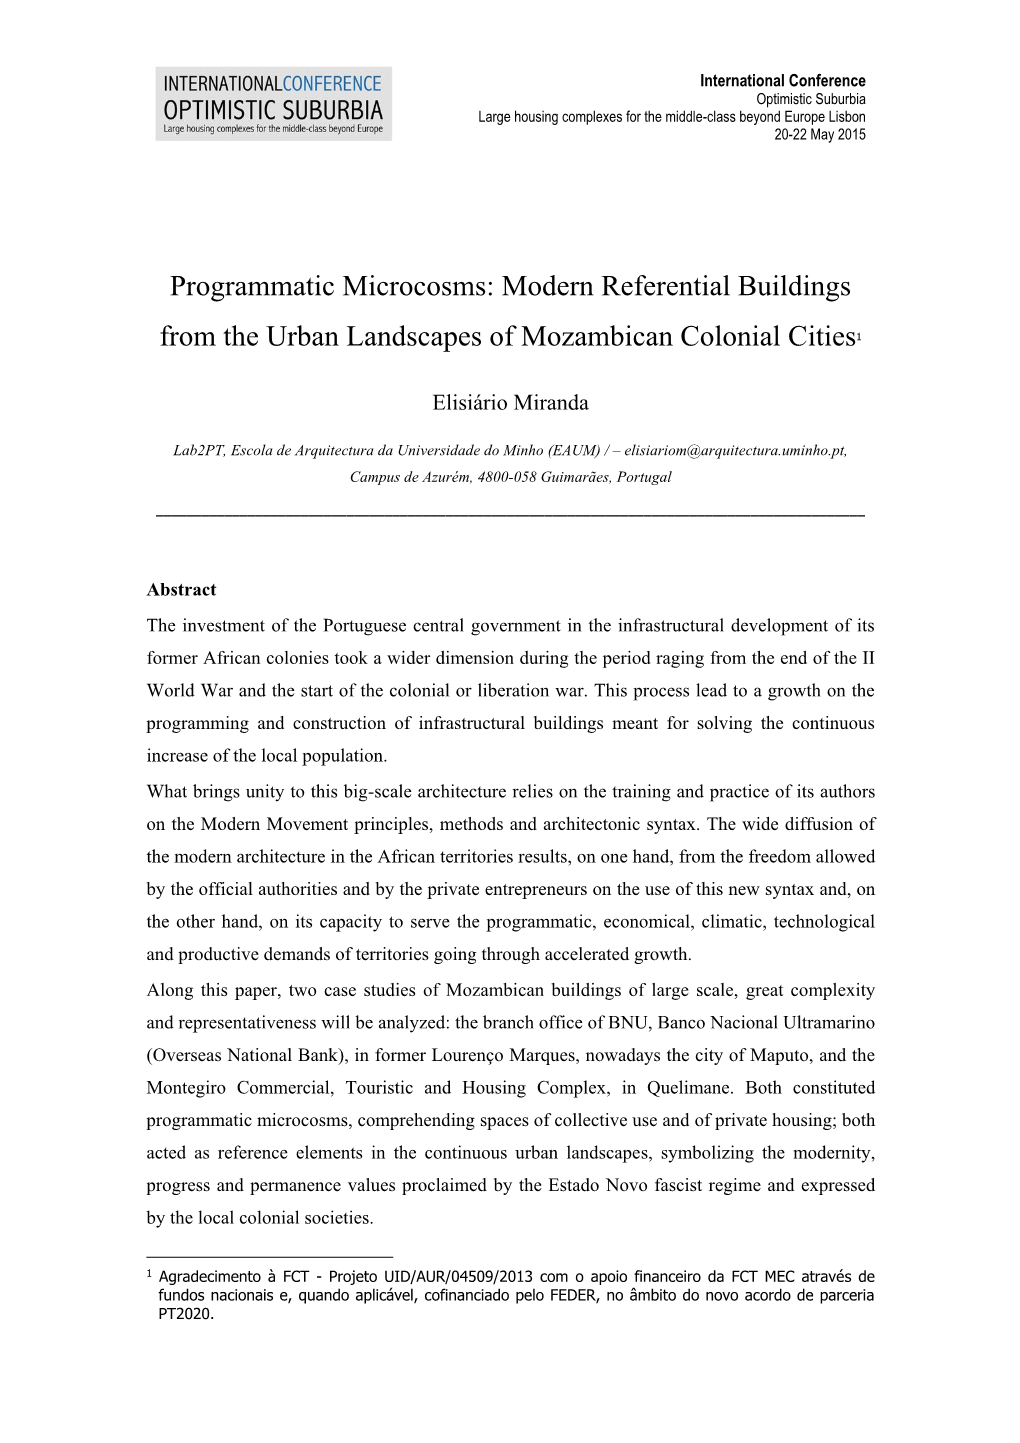 Modern Referential Buildings from the Urban Landscapes of Mozambican Colonial Cities